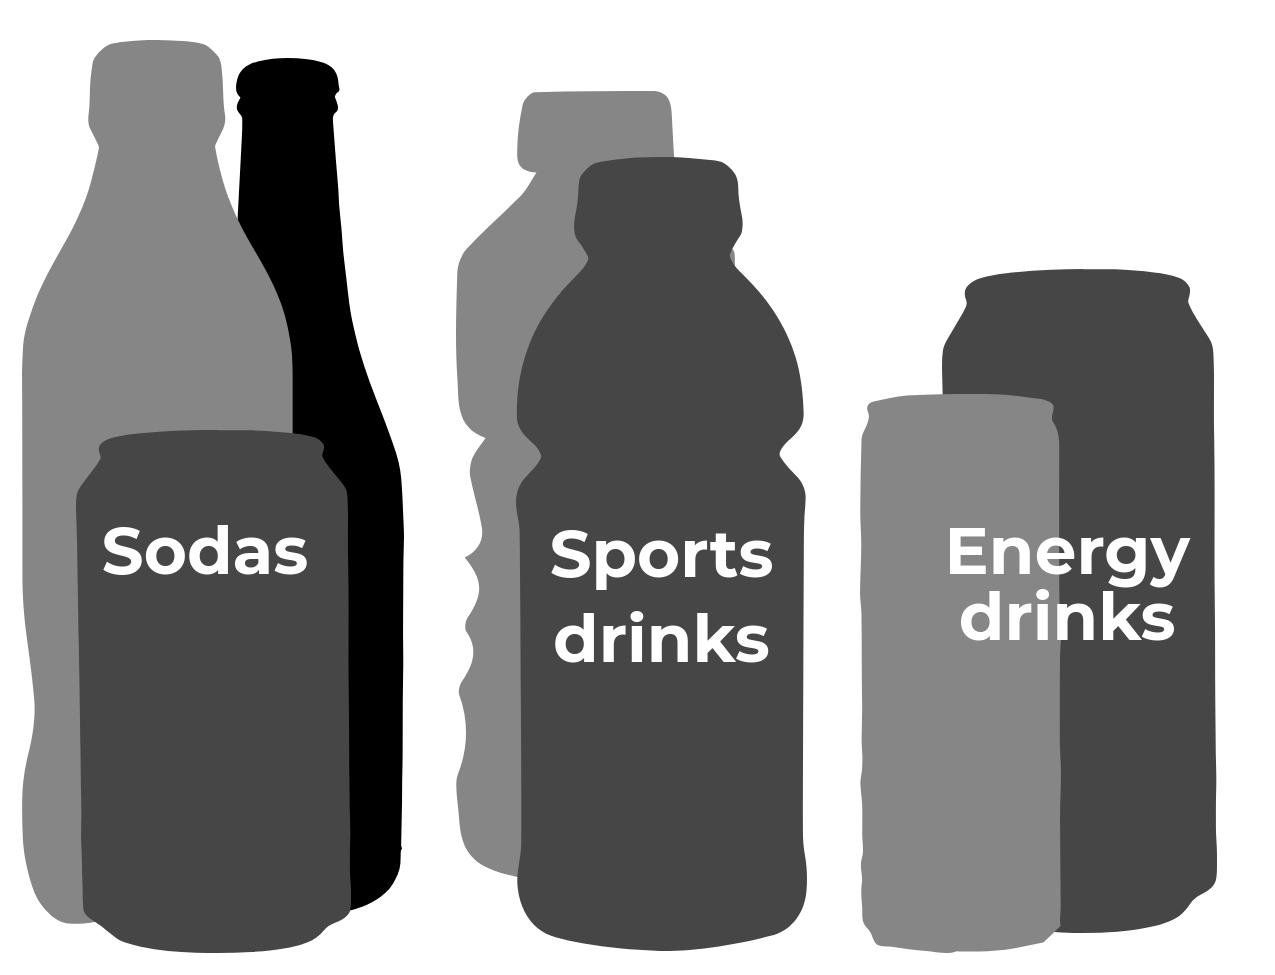 Sodas, sports drinks, and energy drinks